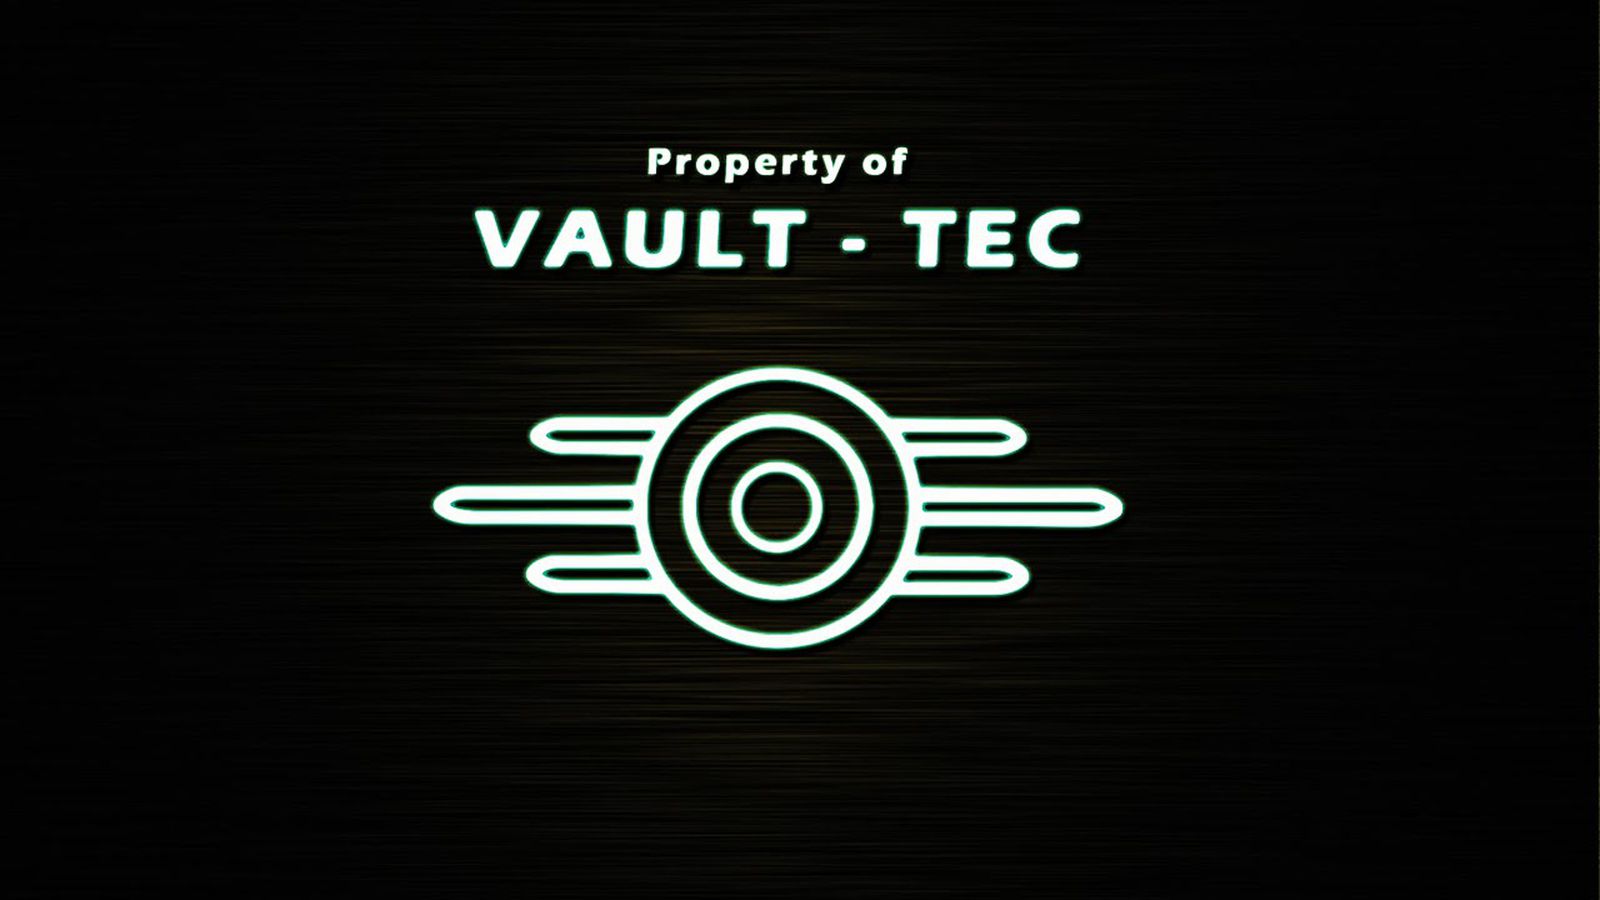 Fallout 4 S 1 888 4 Vault Tec Is A Real Number Here S What Happens